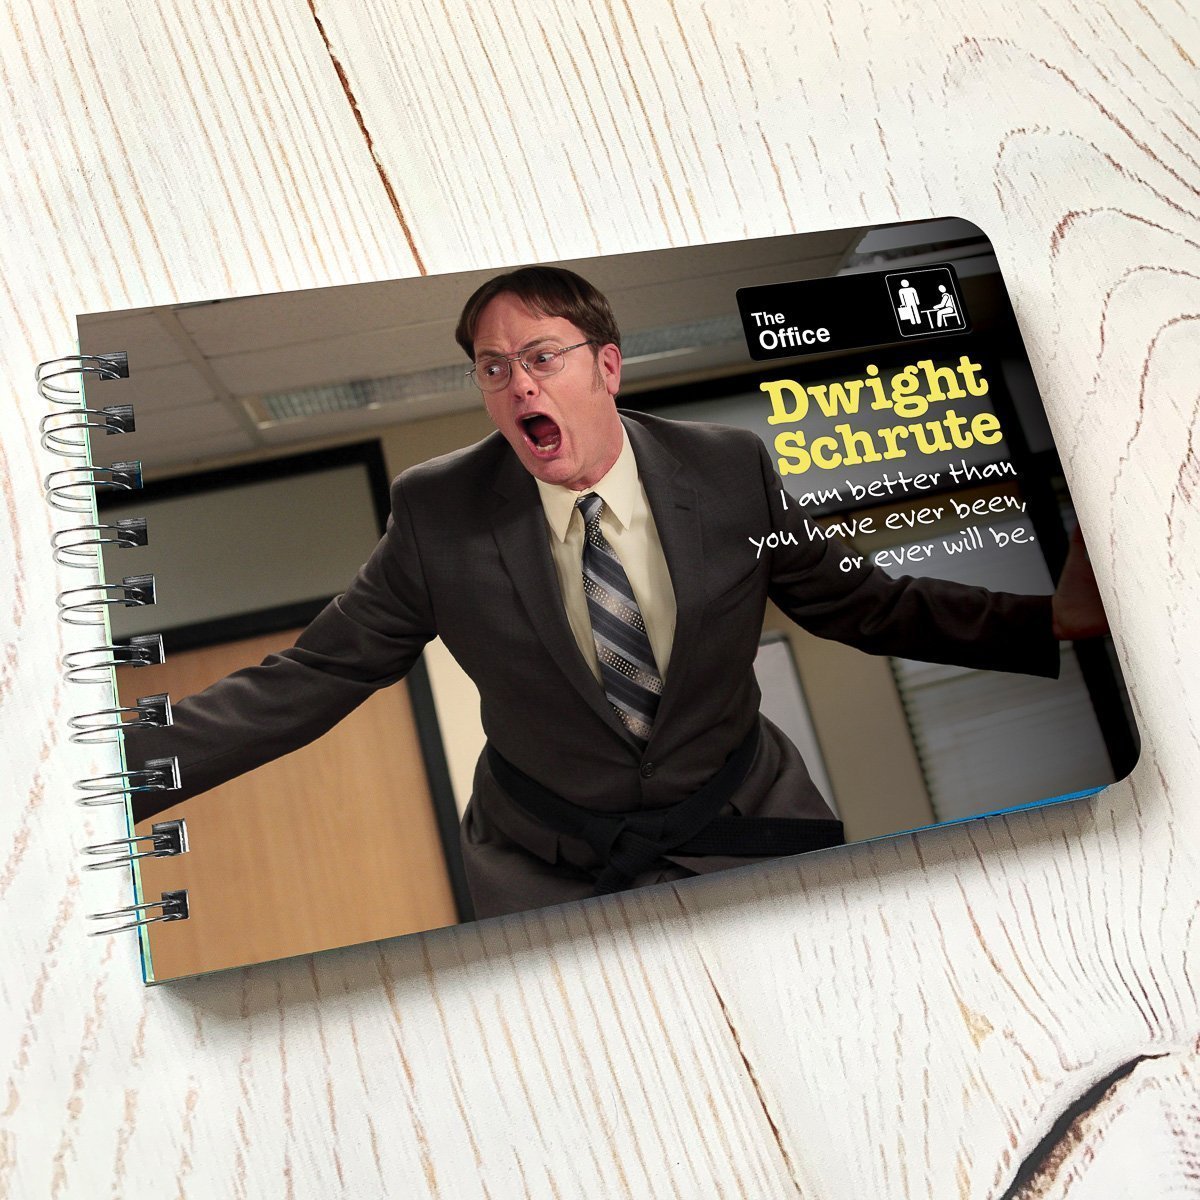 "The Office" Dwight Schrute's Book of Quotes